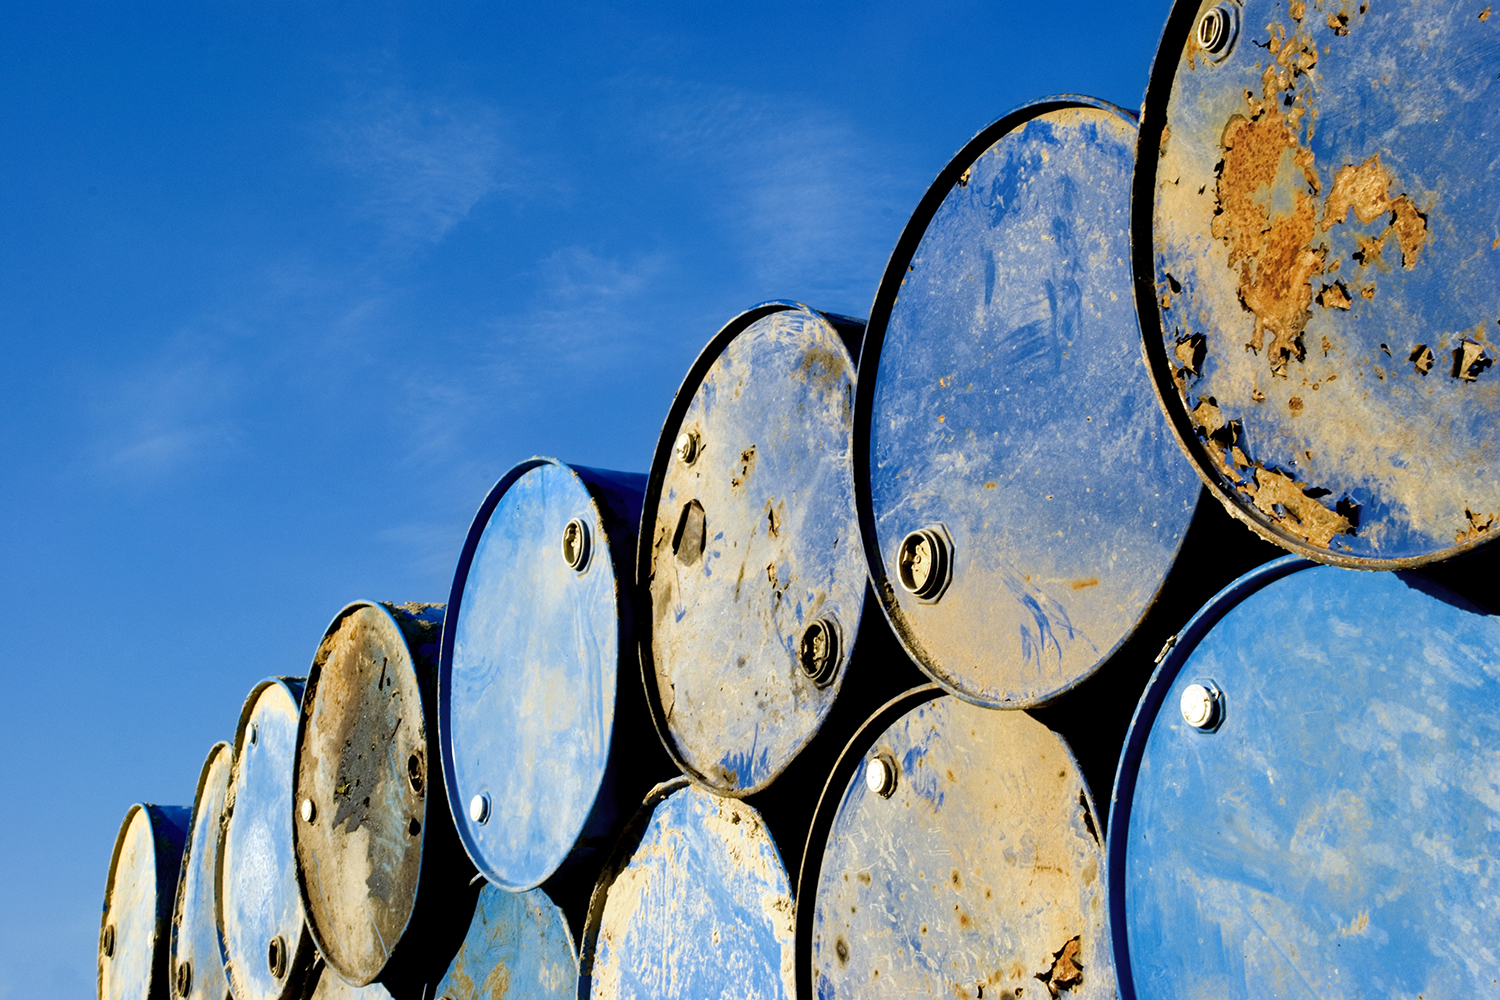 Batch of old rusty barrels against the blue sky.